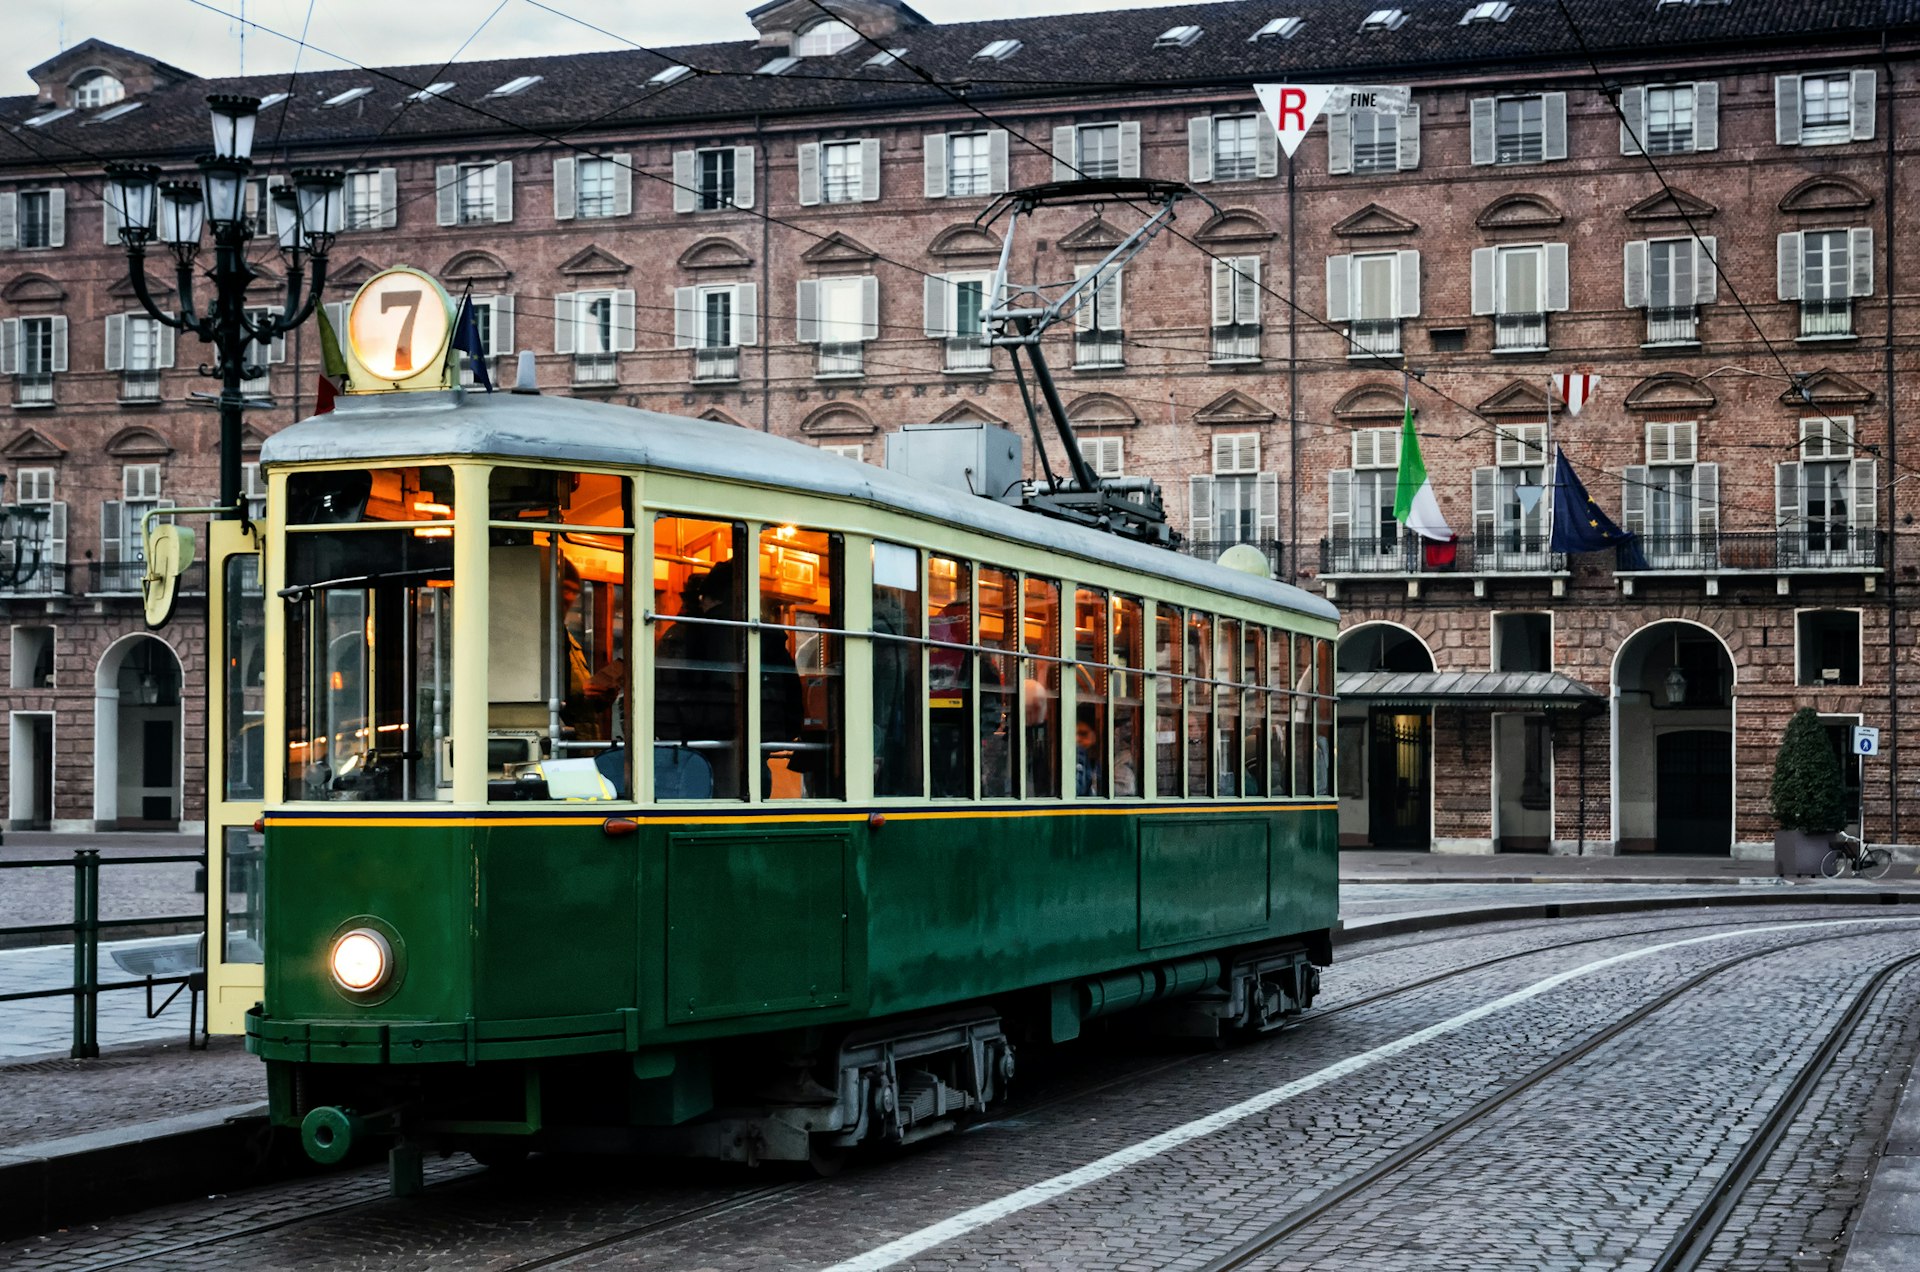 The historic green cab of the number 7 tram line in Turin